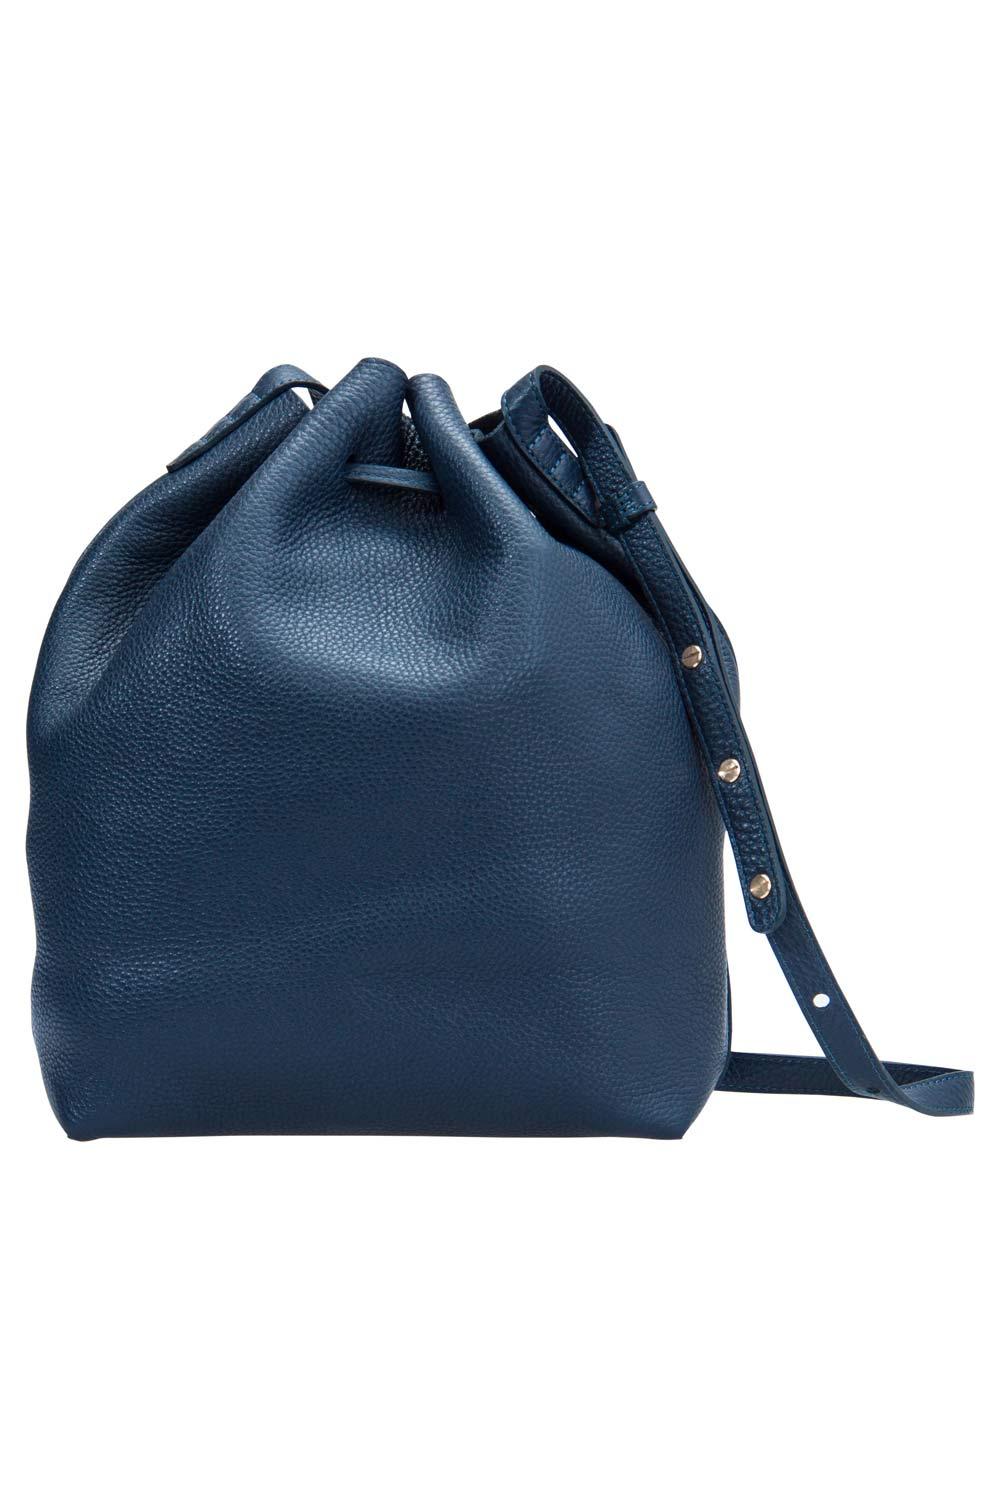 This wonderful Mansur Gavriel design is made from leather and enhanced with gold-tone hardware. The bag has a bucket shape with a drawstring closure that secures the leather interior. It is complete with a shoulder strap. Navy blue in color, it is